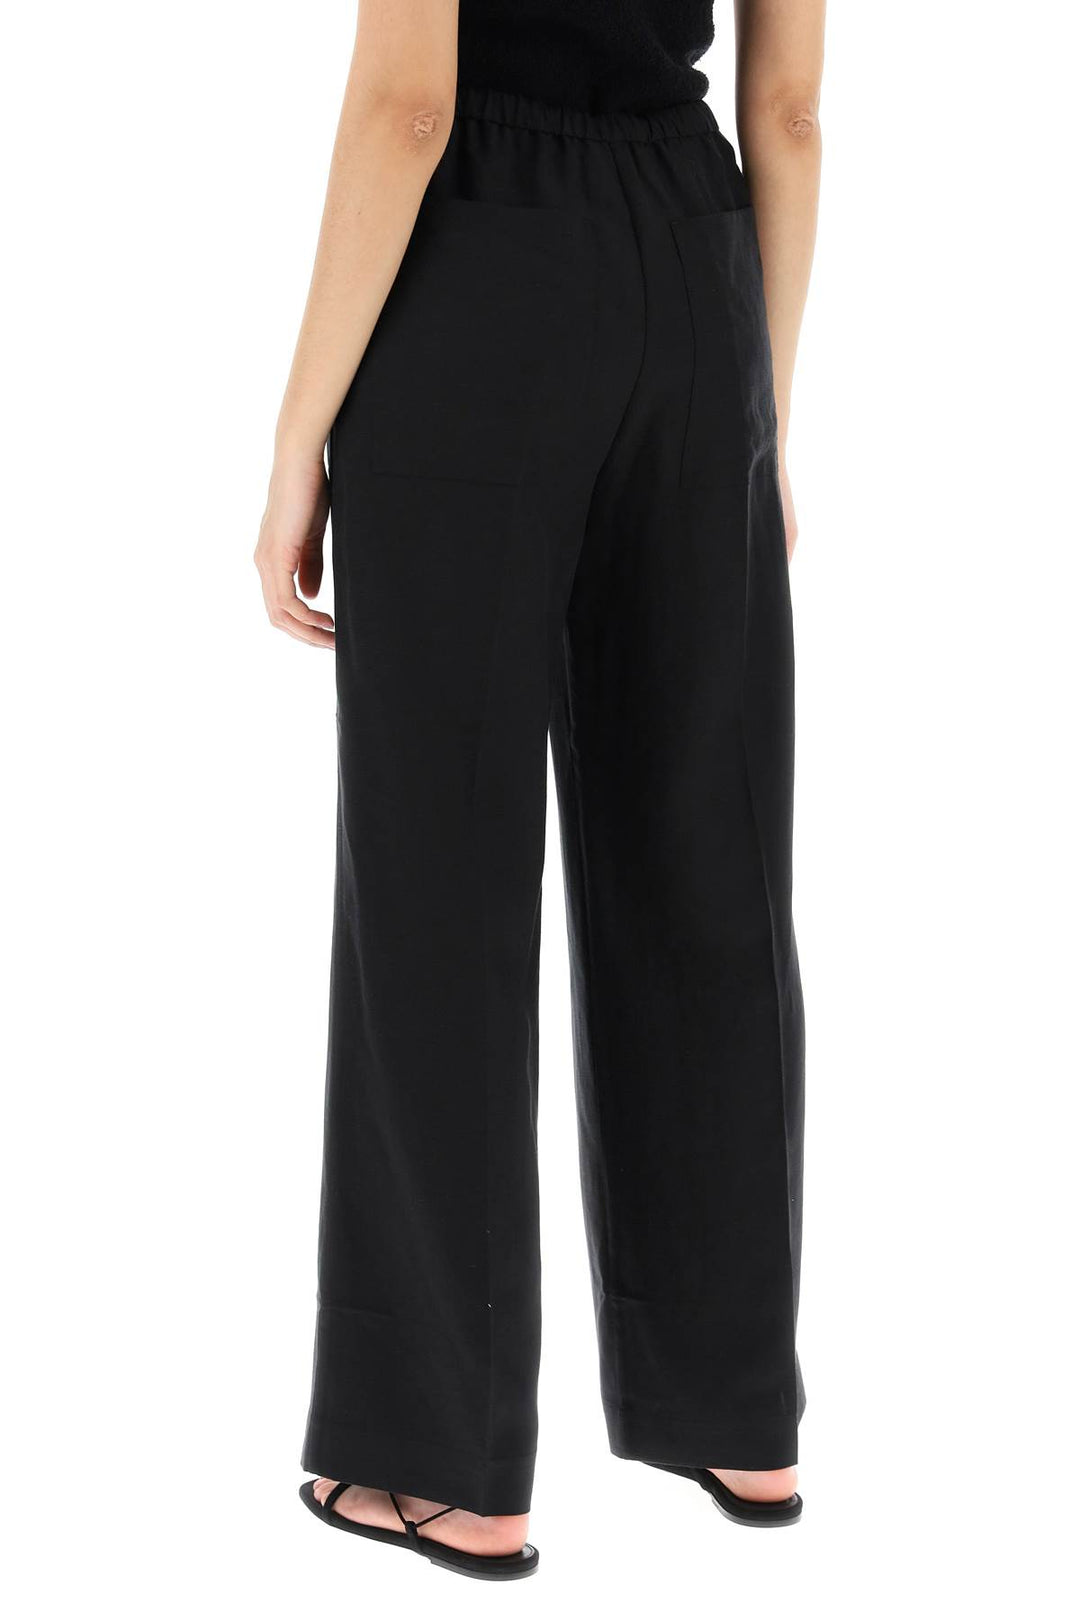 Toteme Lightweight Linen And Viscose Trousers   Nero